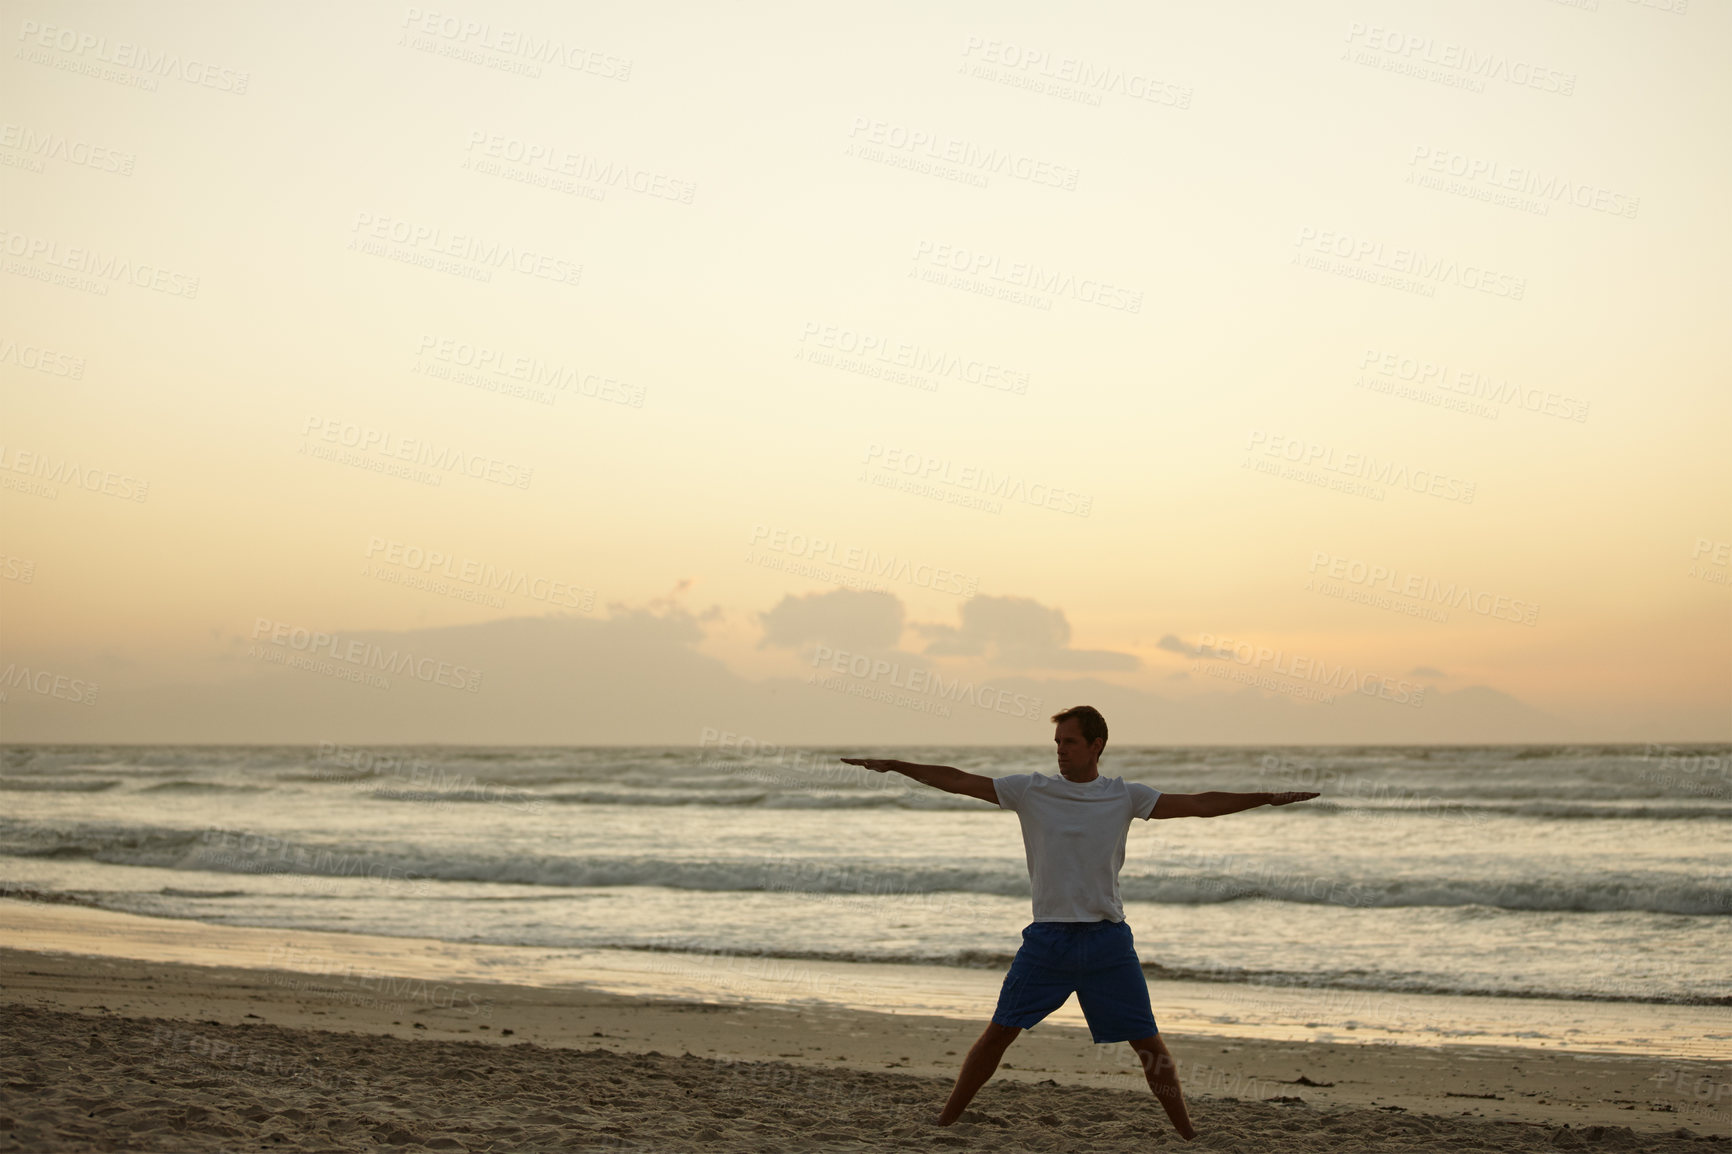 Buy stock photo Shot of a man doing yoga on the beach at sunset